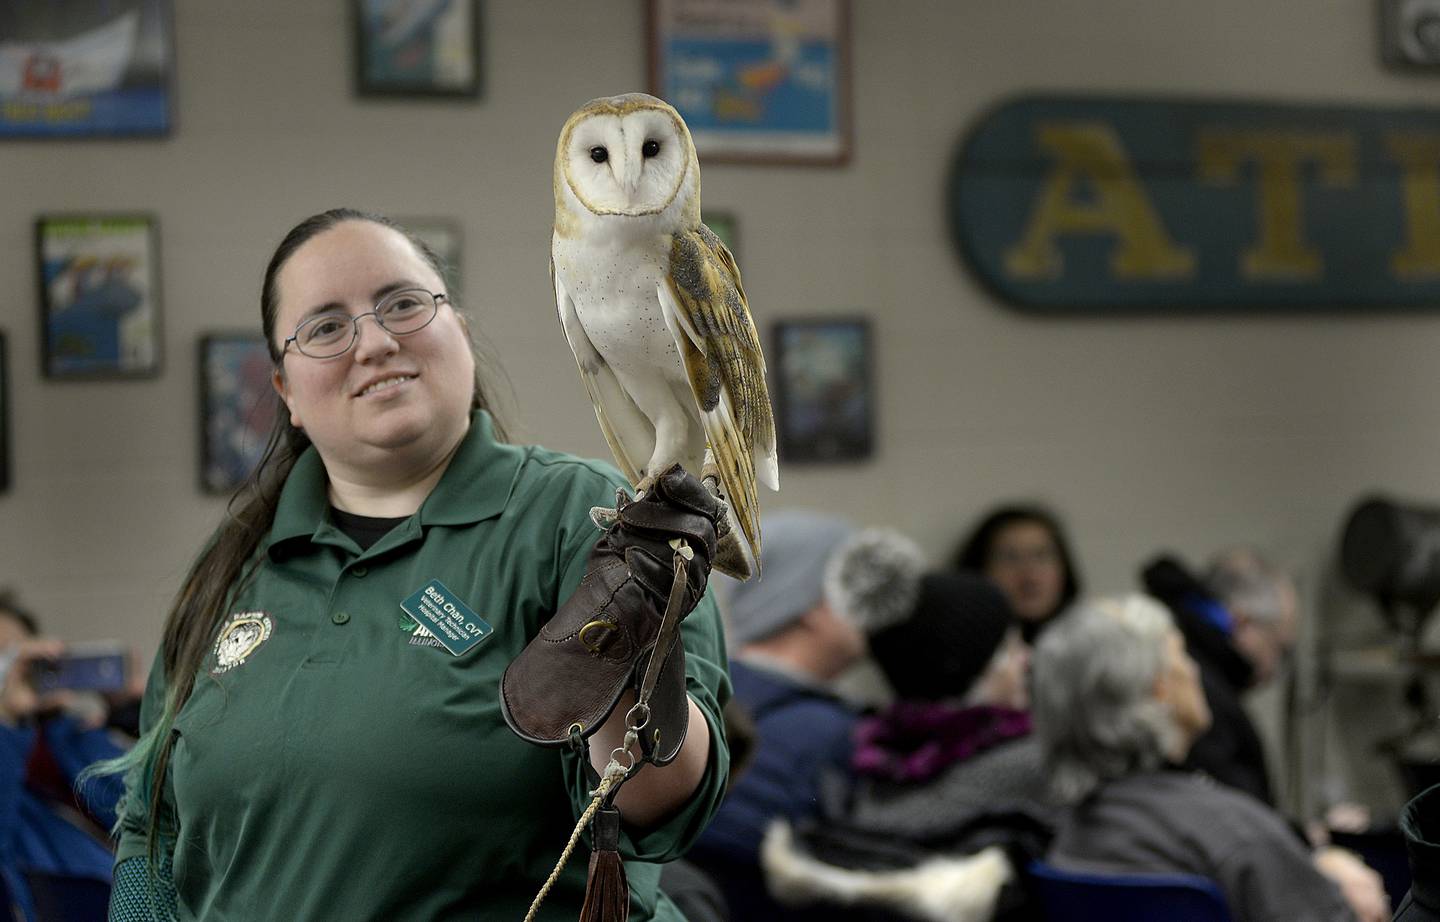 Beth Chan, of the Illinois Raptor Center, shows a barn owl to the audience Saturday, Jan. 28, 2023, at the Illinois Waterway Visitors Center during the Illinois Birds Of Prey program as part of the Eagle Watch Weekend.